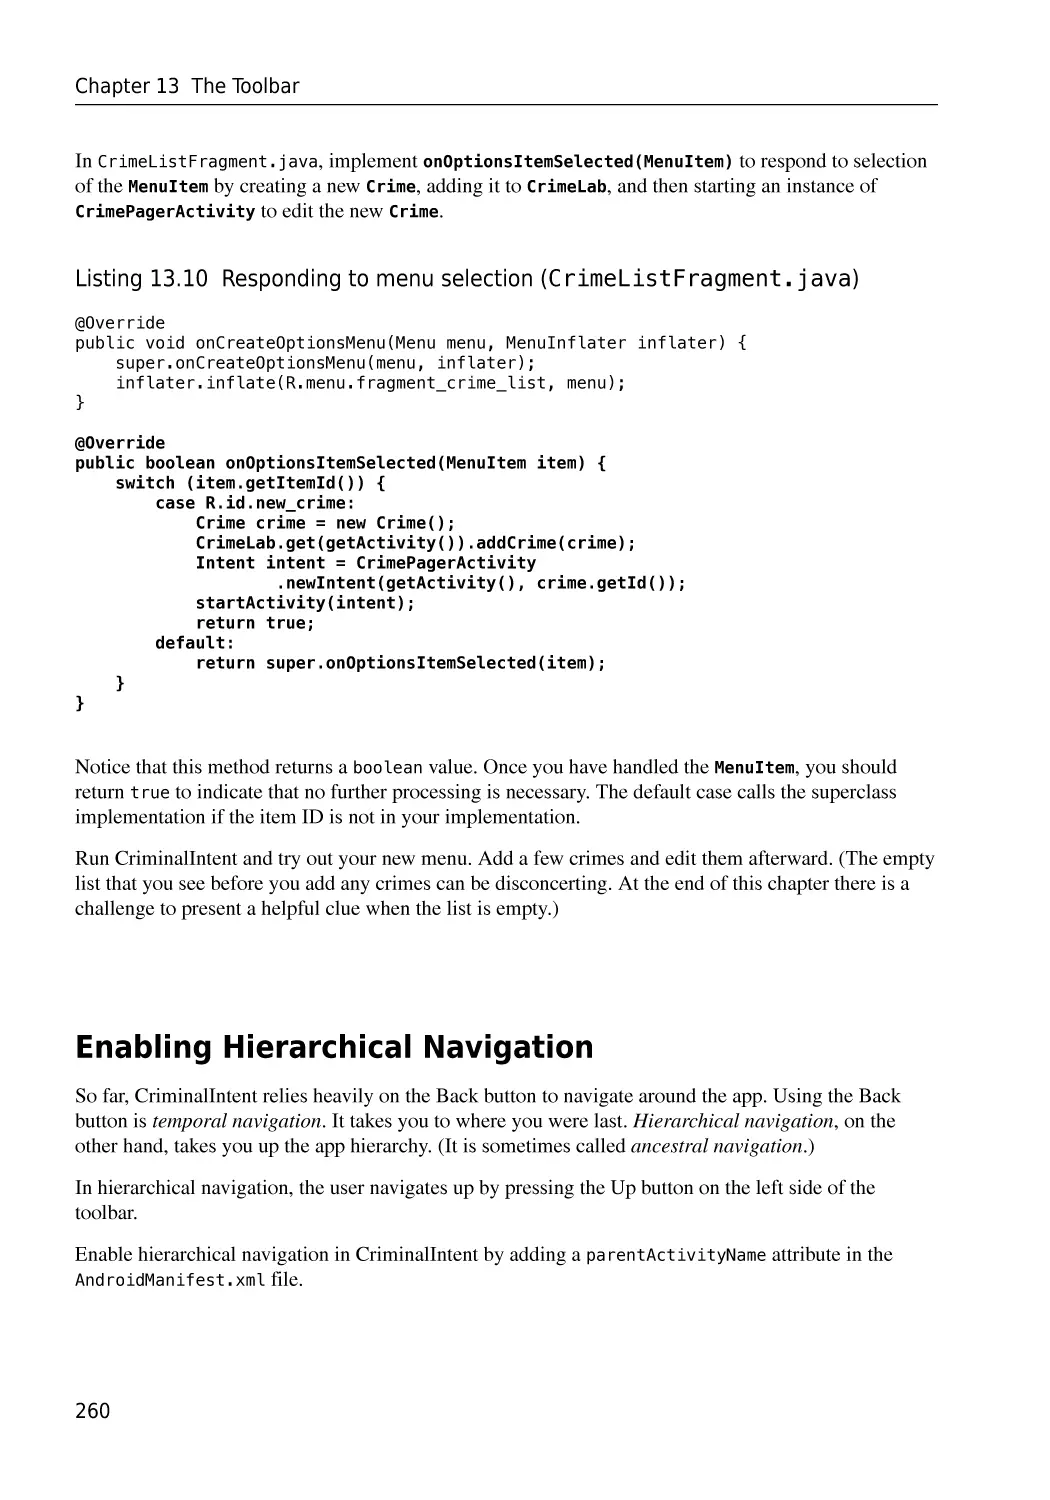 Enabling Hierarchical Navigation